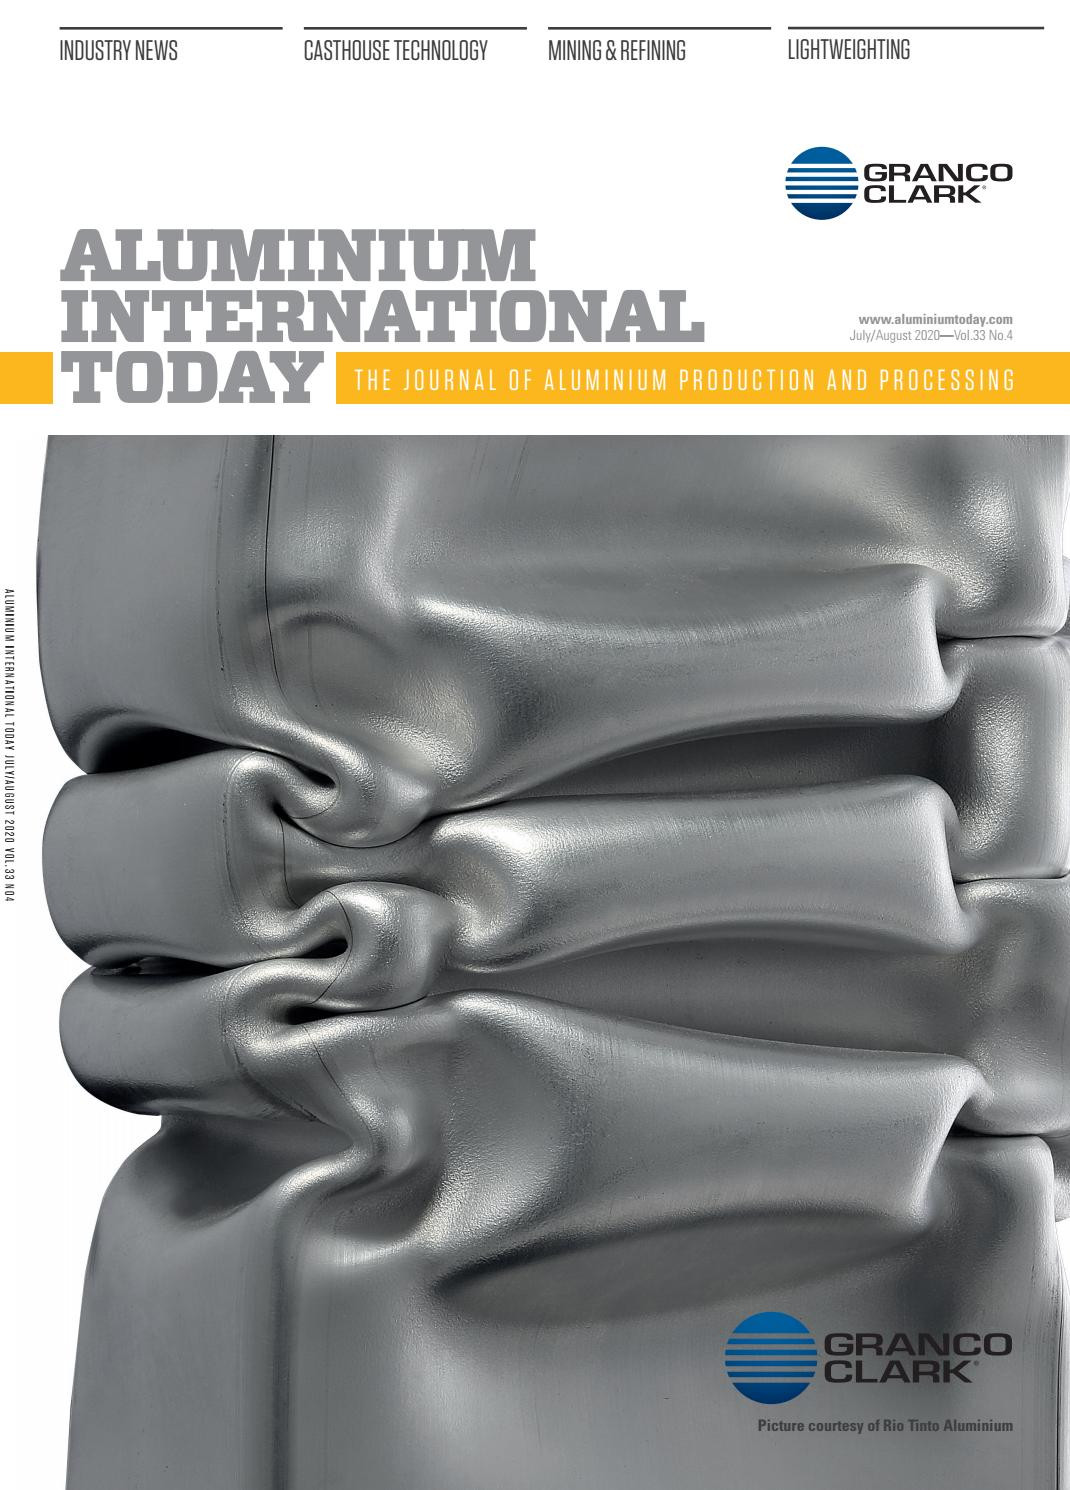 Outside Sales In the Aluminum Extrusions Resume Sample Aluminium International today July/august 2020 by Quartz – issuu